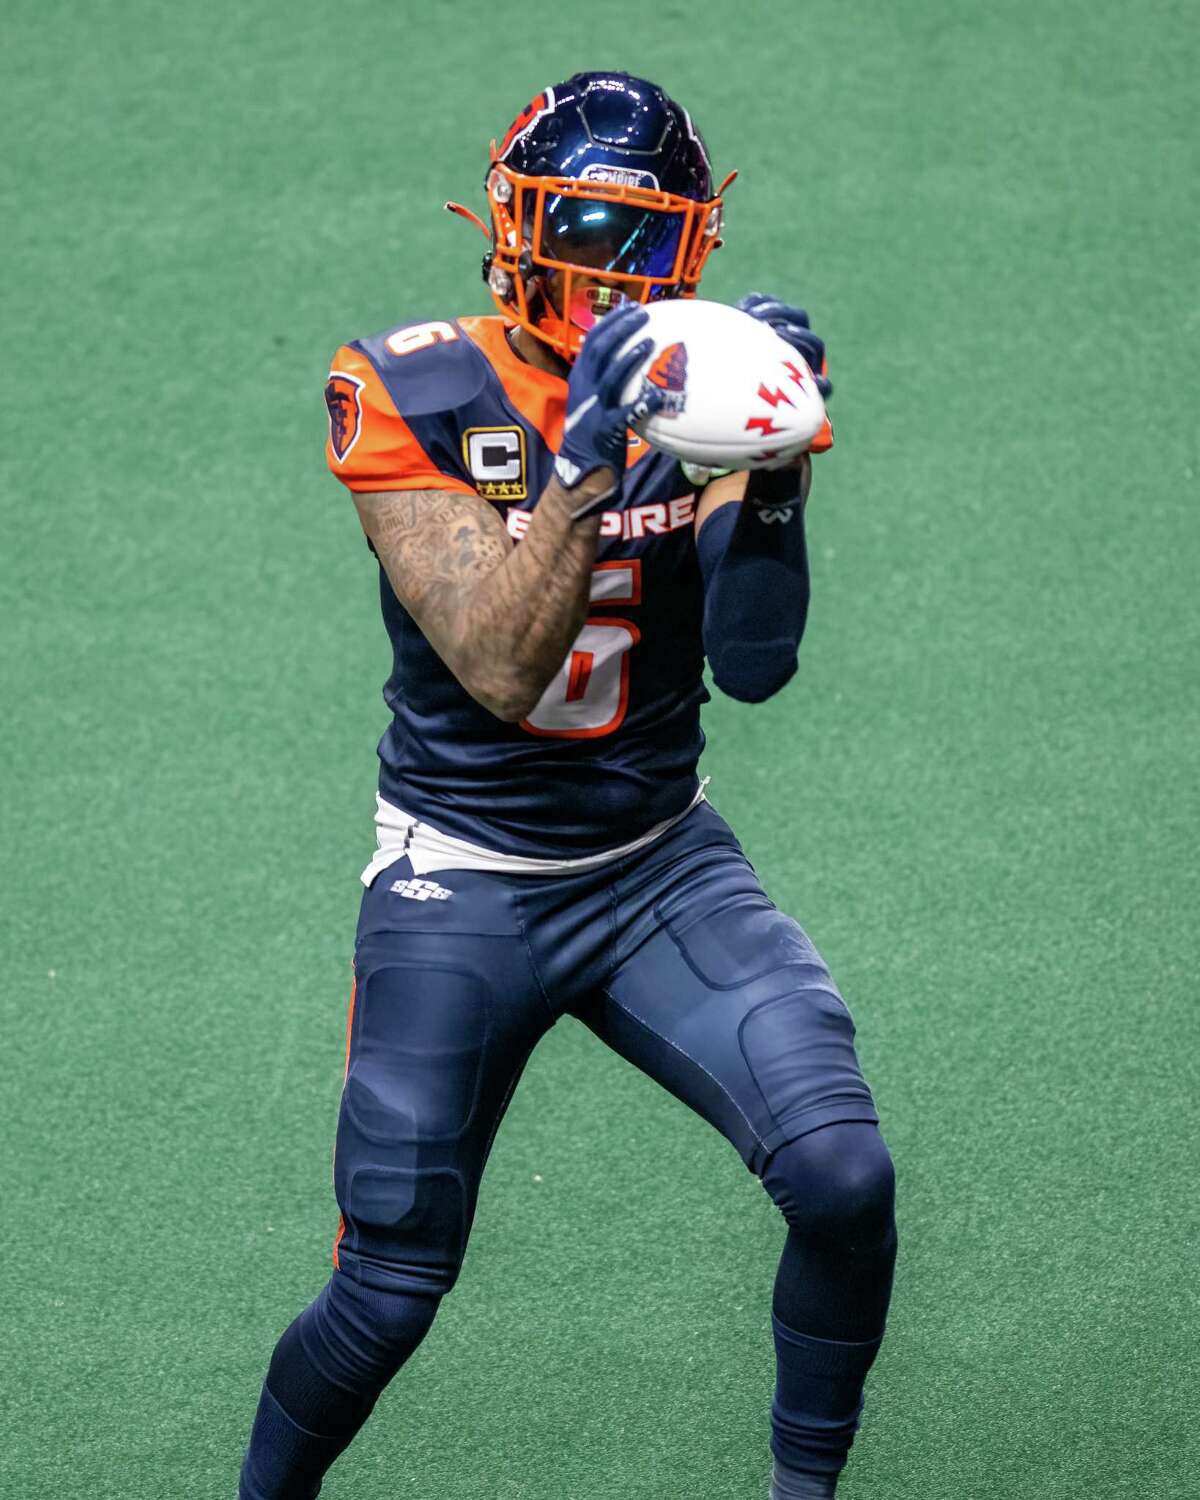 Albany Empire receiver/defensive back Darius Prince makes a catch against the Carolina Cobras during a National Arena League game at the MVP Arena in Albany, NY, on Saturday, April 23, 2022. (Jim Franco/Special to the Times Union)